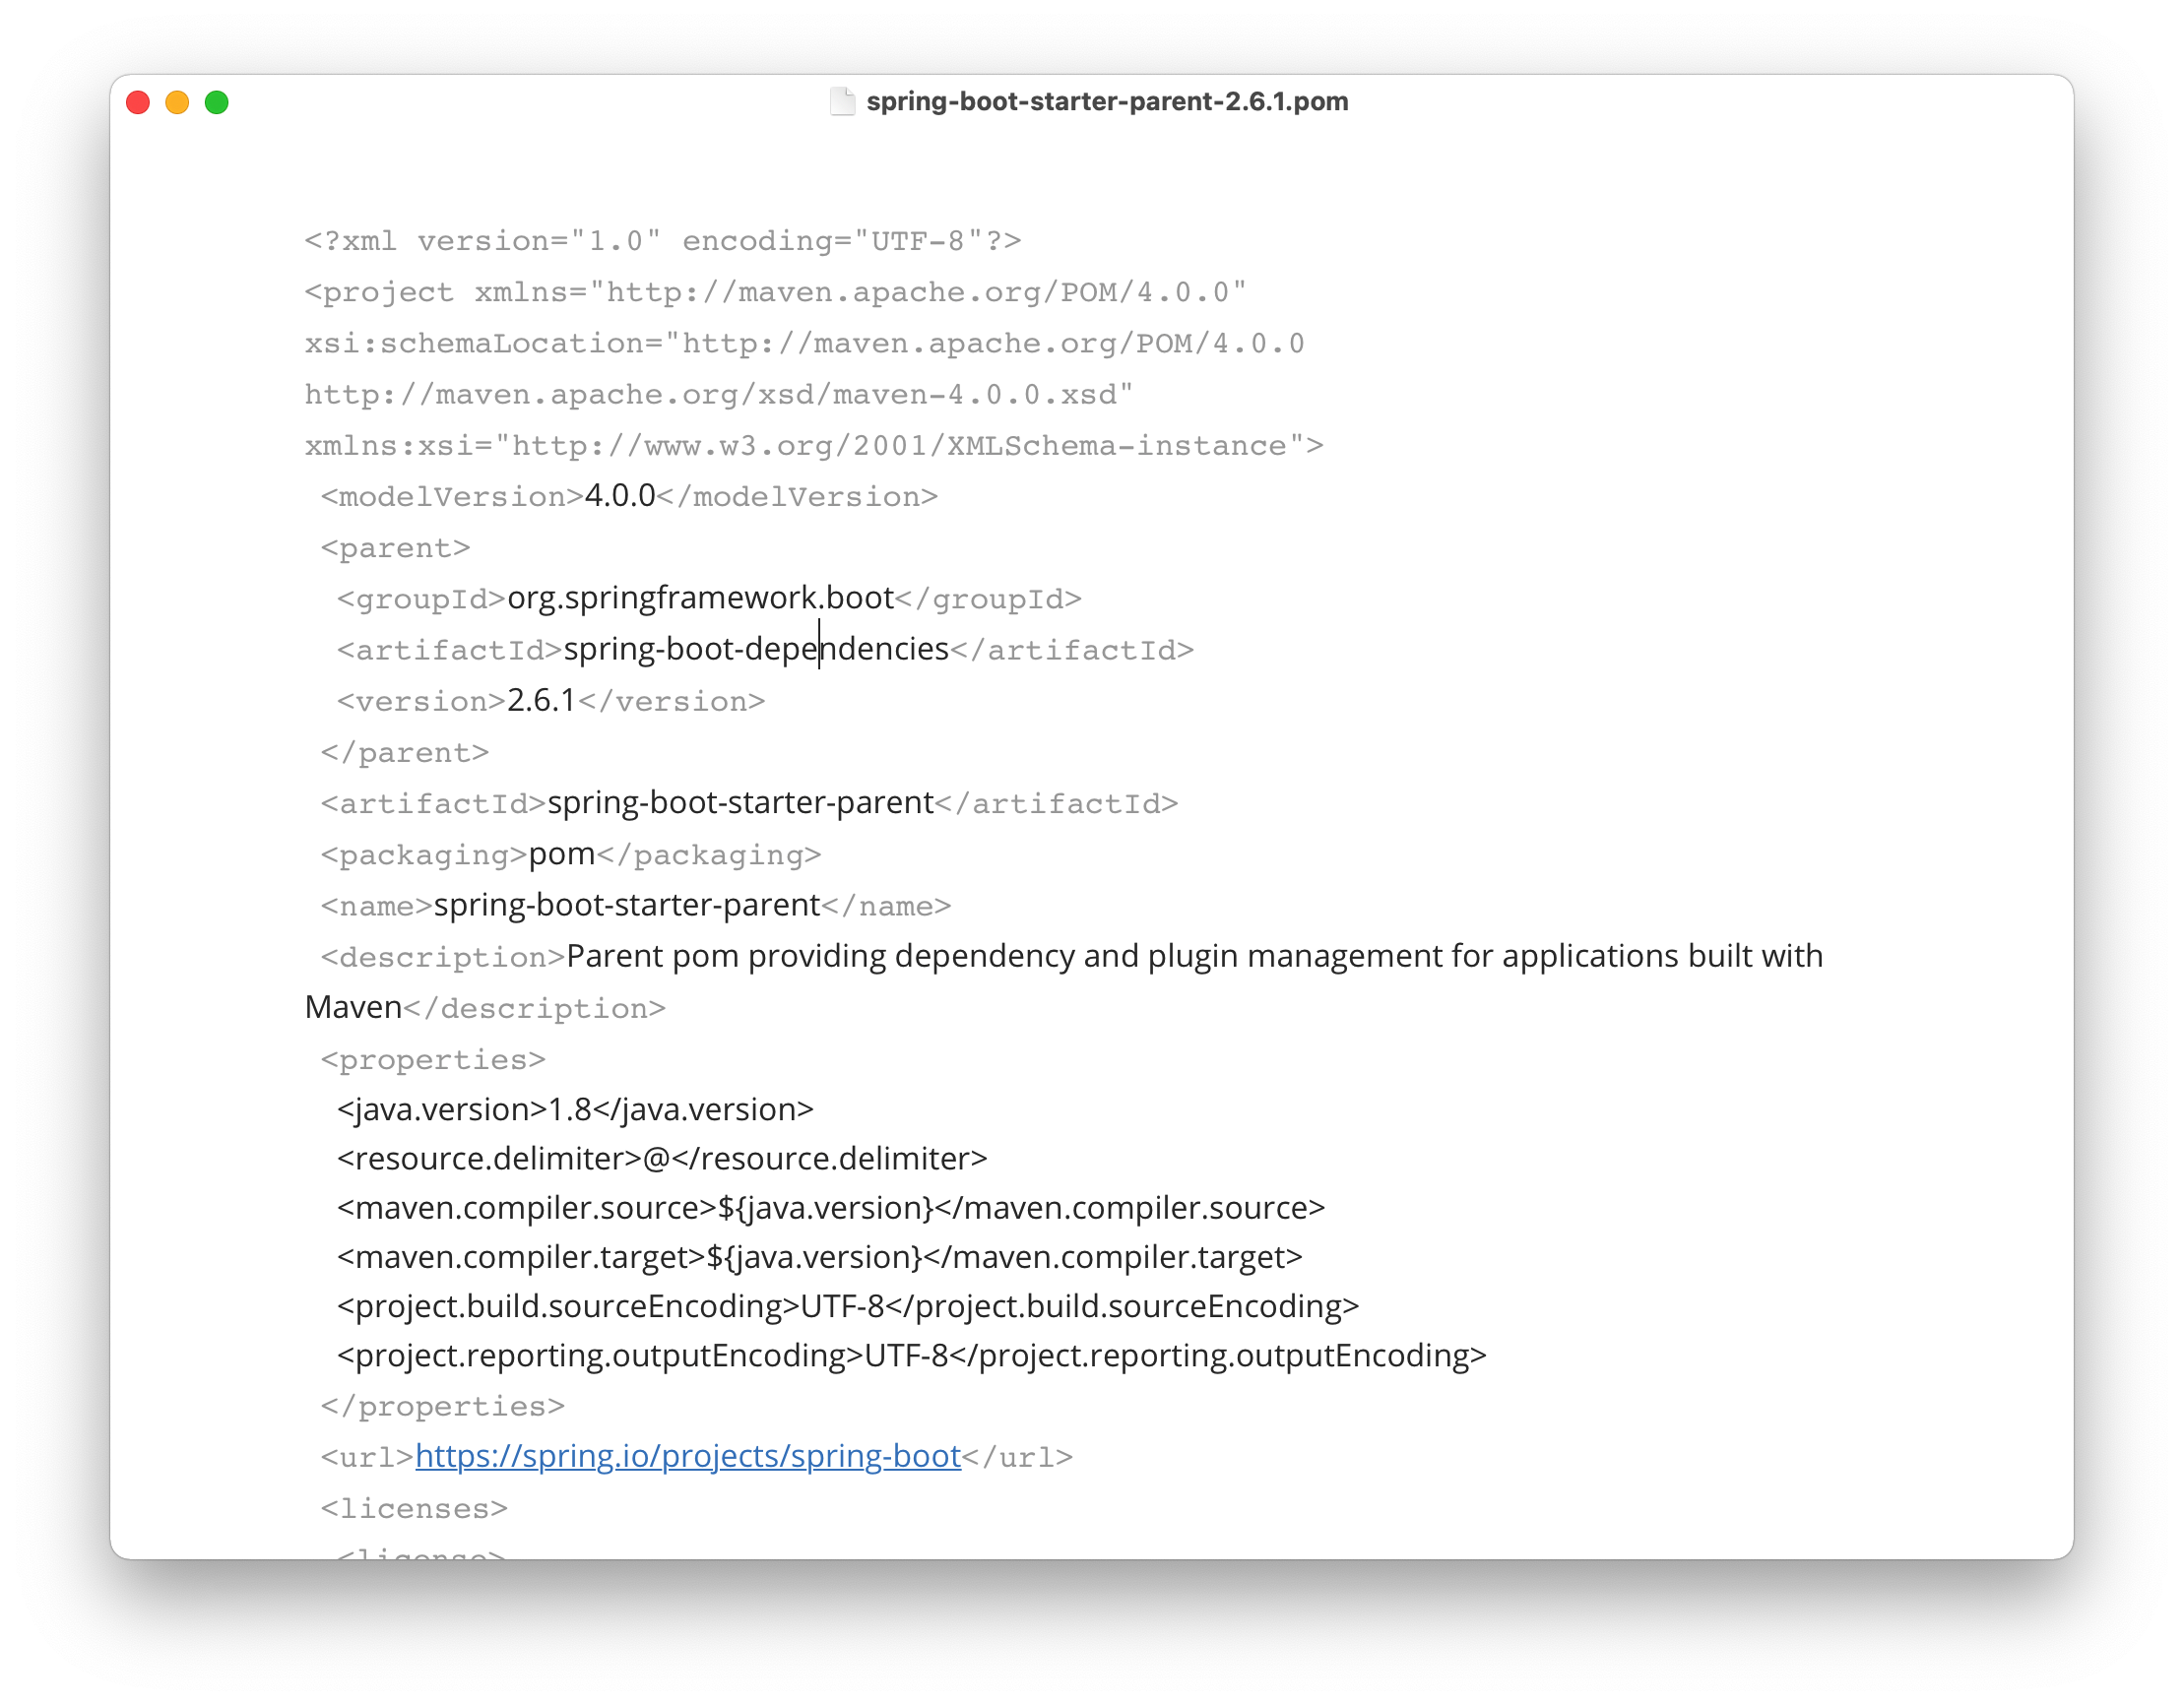 images/springboot/tomcat-03.png